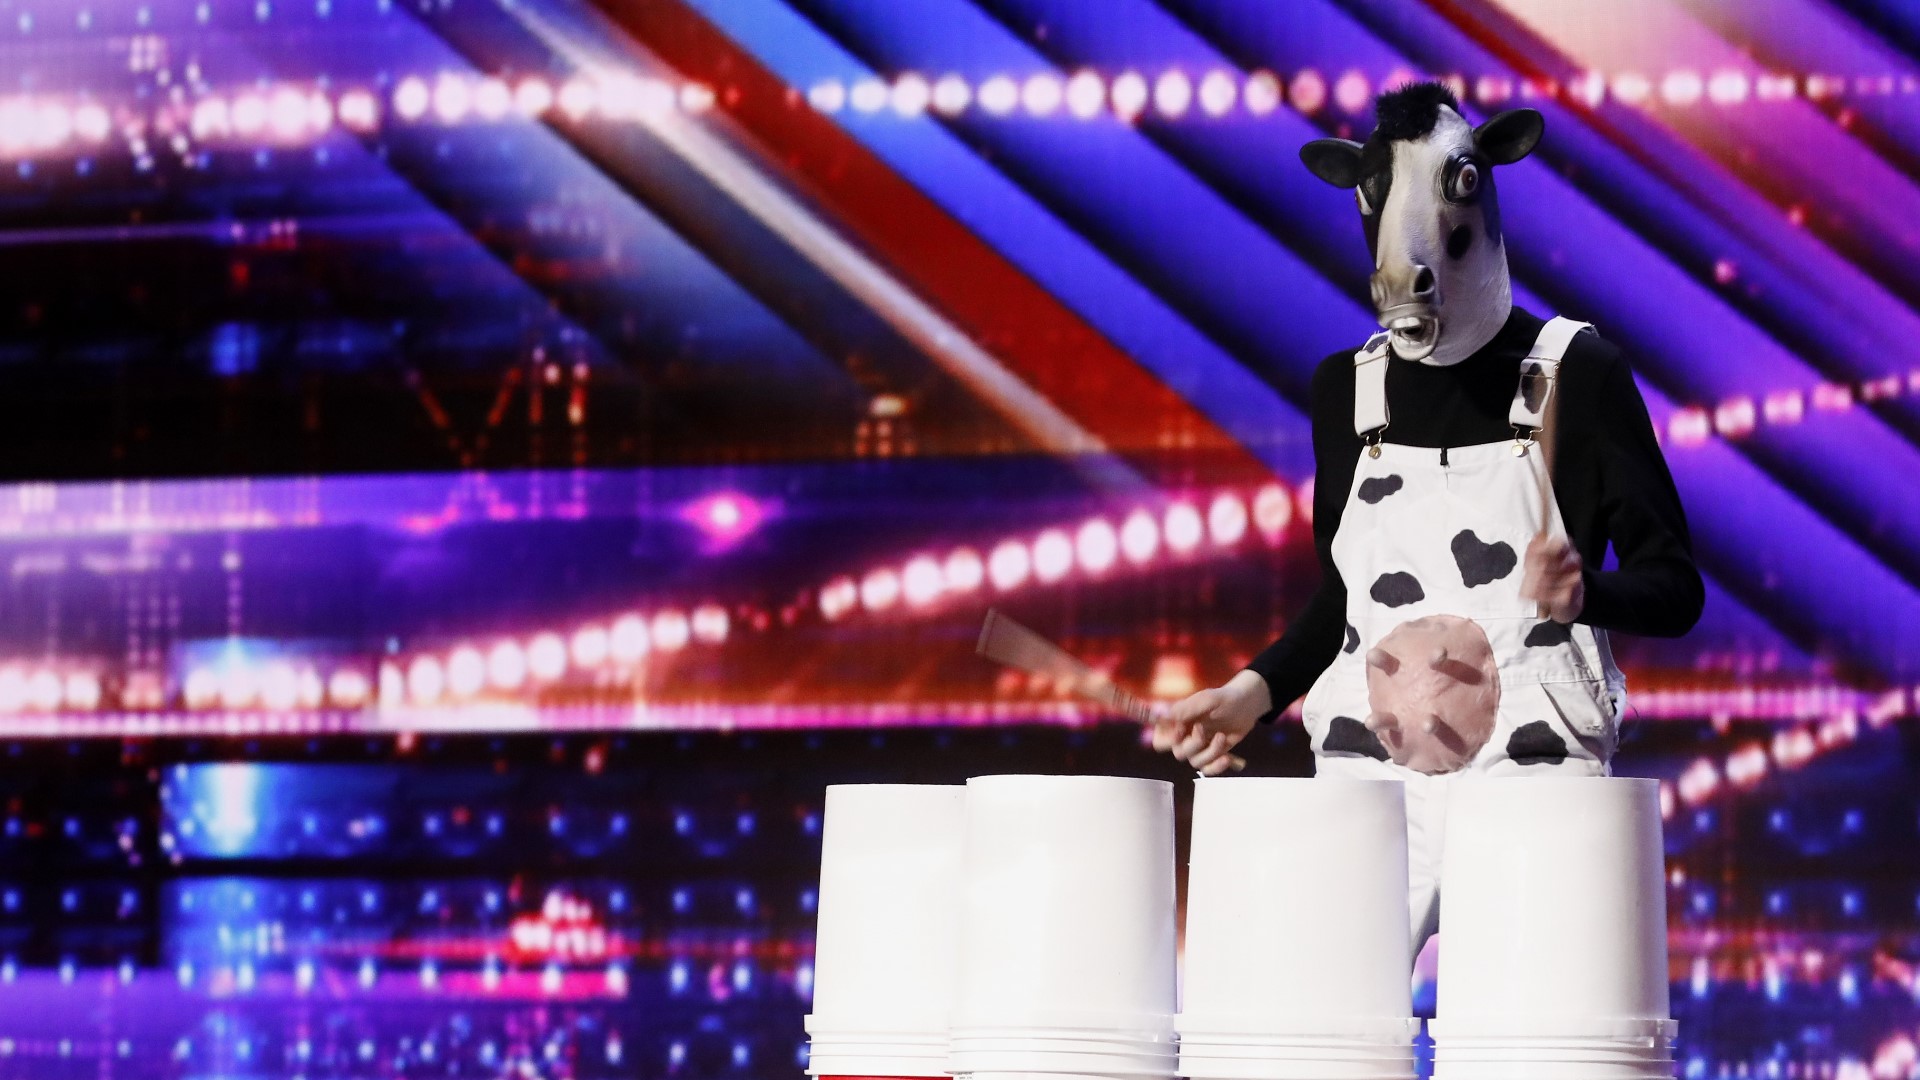 Mr. Moo Shakes drums in a cow outfit to maintain his secret identity. #k5evening